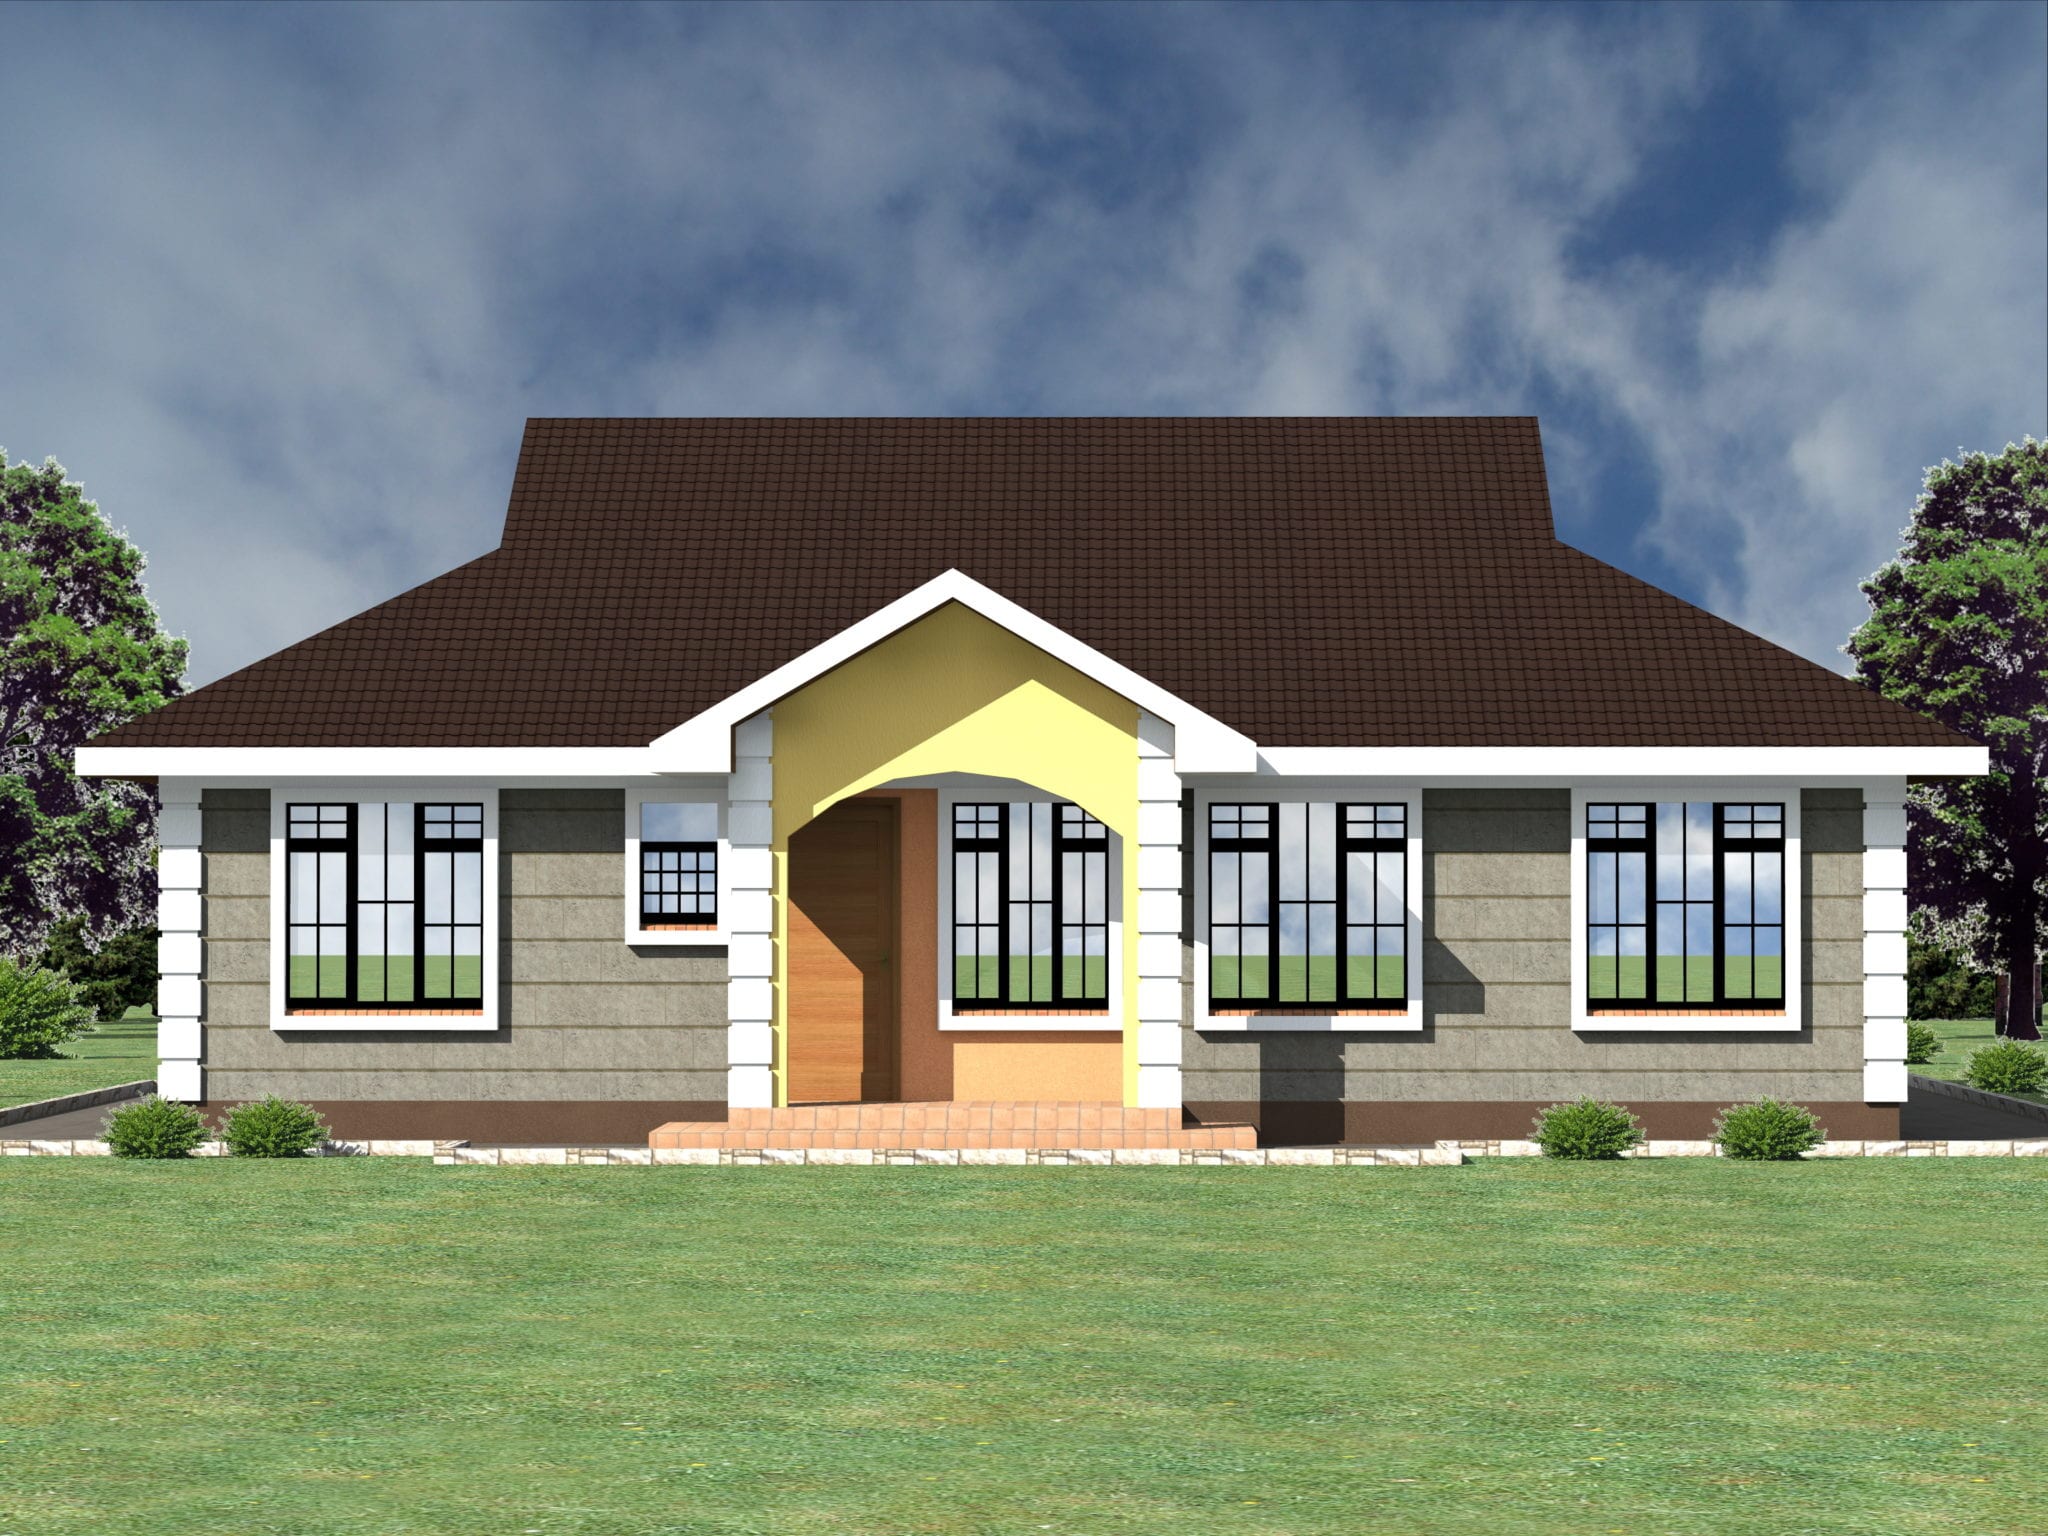 Roby Gallery: 4 Bedroom Bungalow House Plans : 4 Bedroom Bungalow House